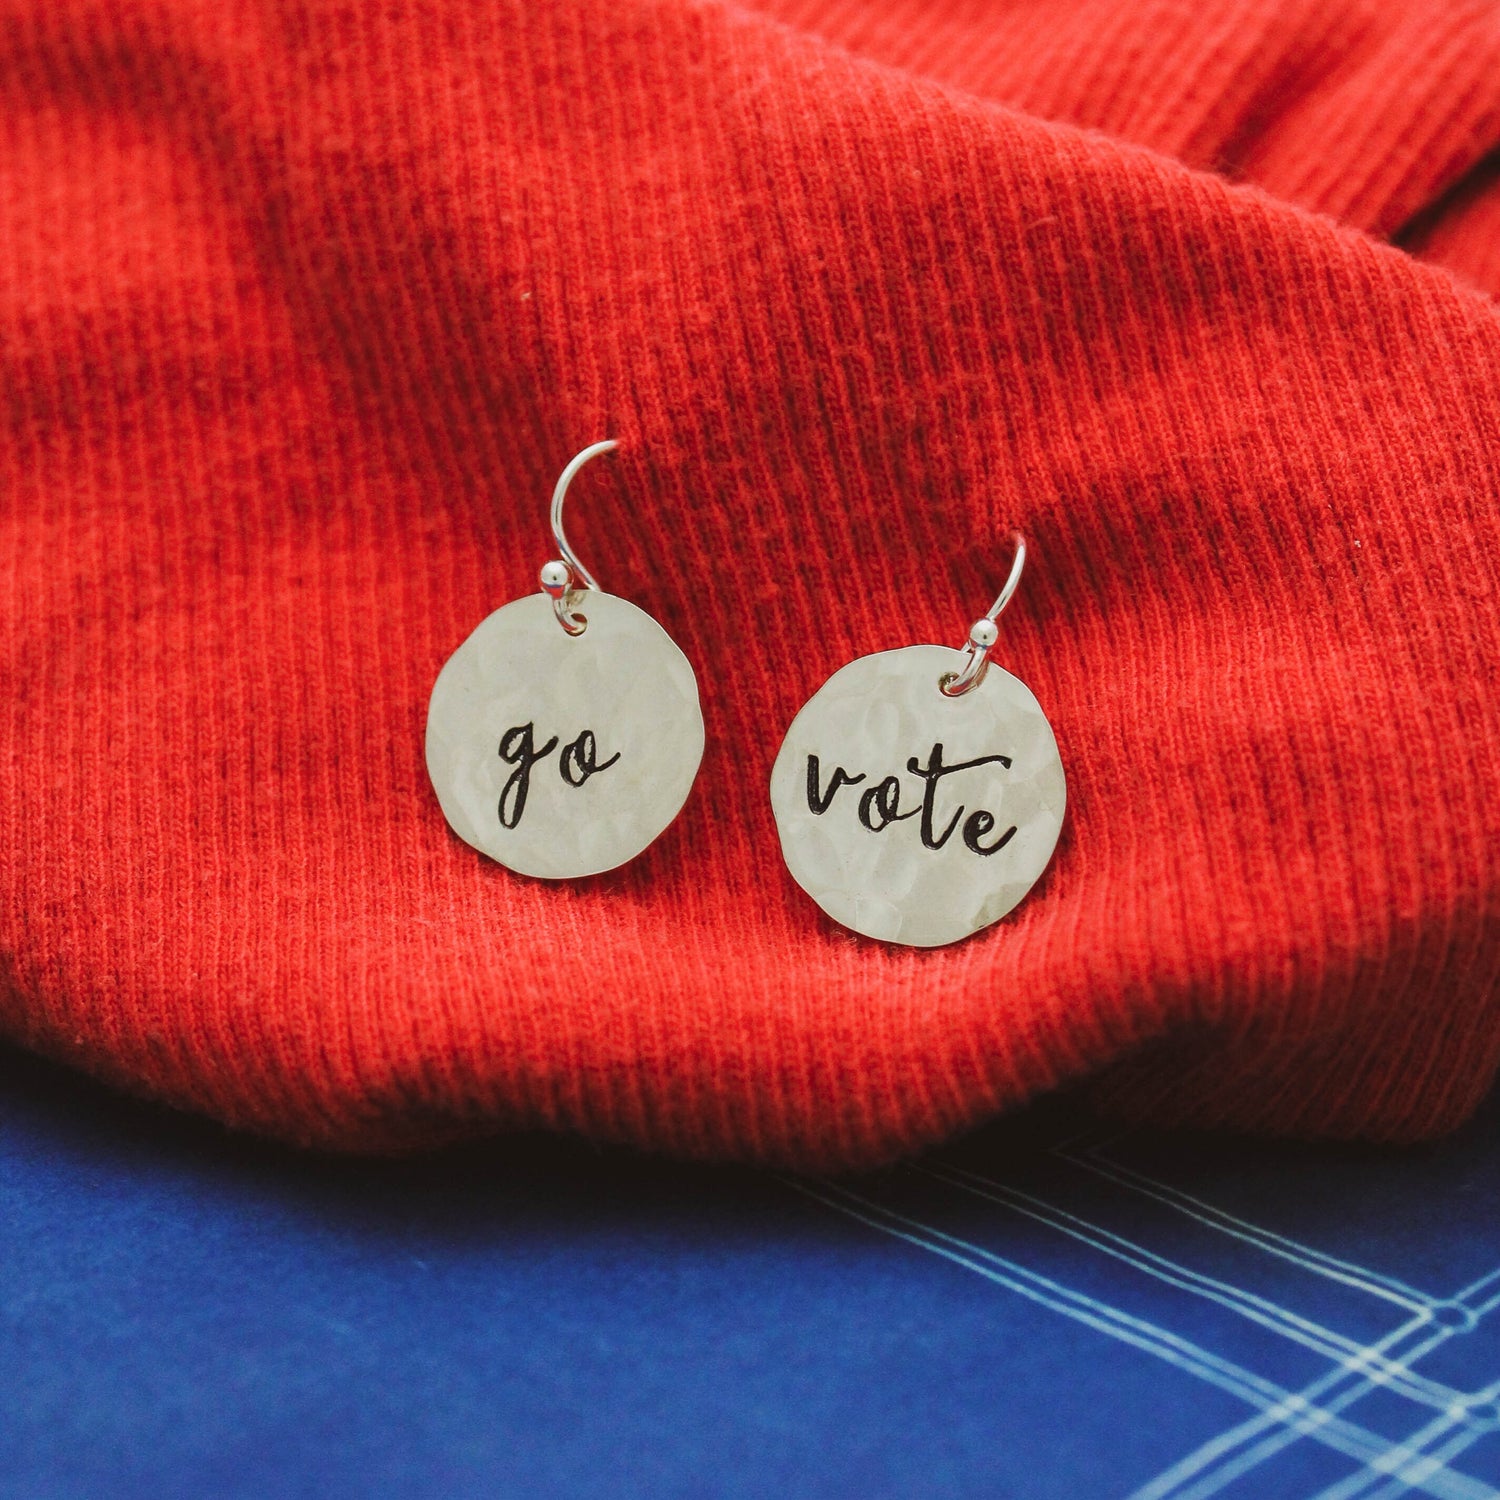 GO VOTE Earrings in Sterling Silver, Voting Earrings, Voting Jewelry, Motivational Jewelry, Gifts for Her, VOTE! Activist Jewelry, Election